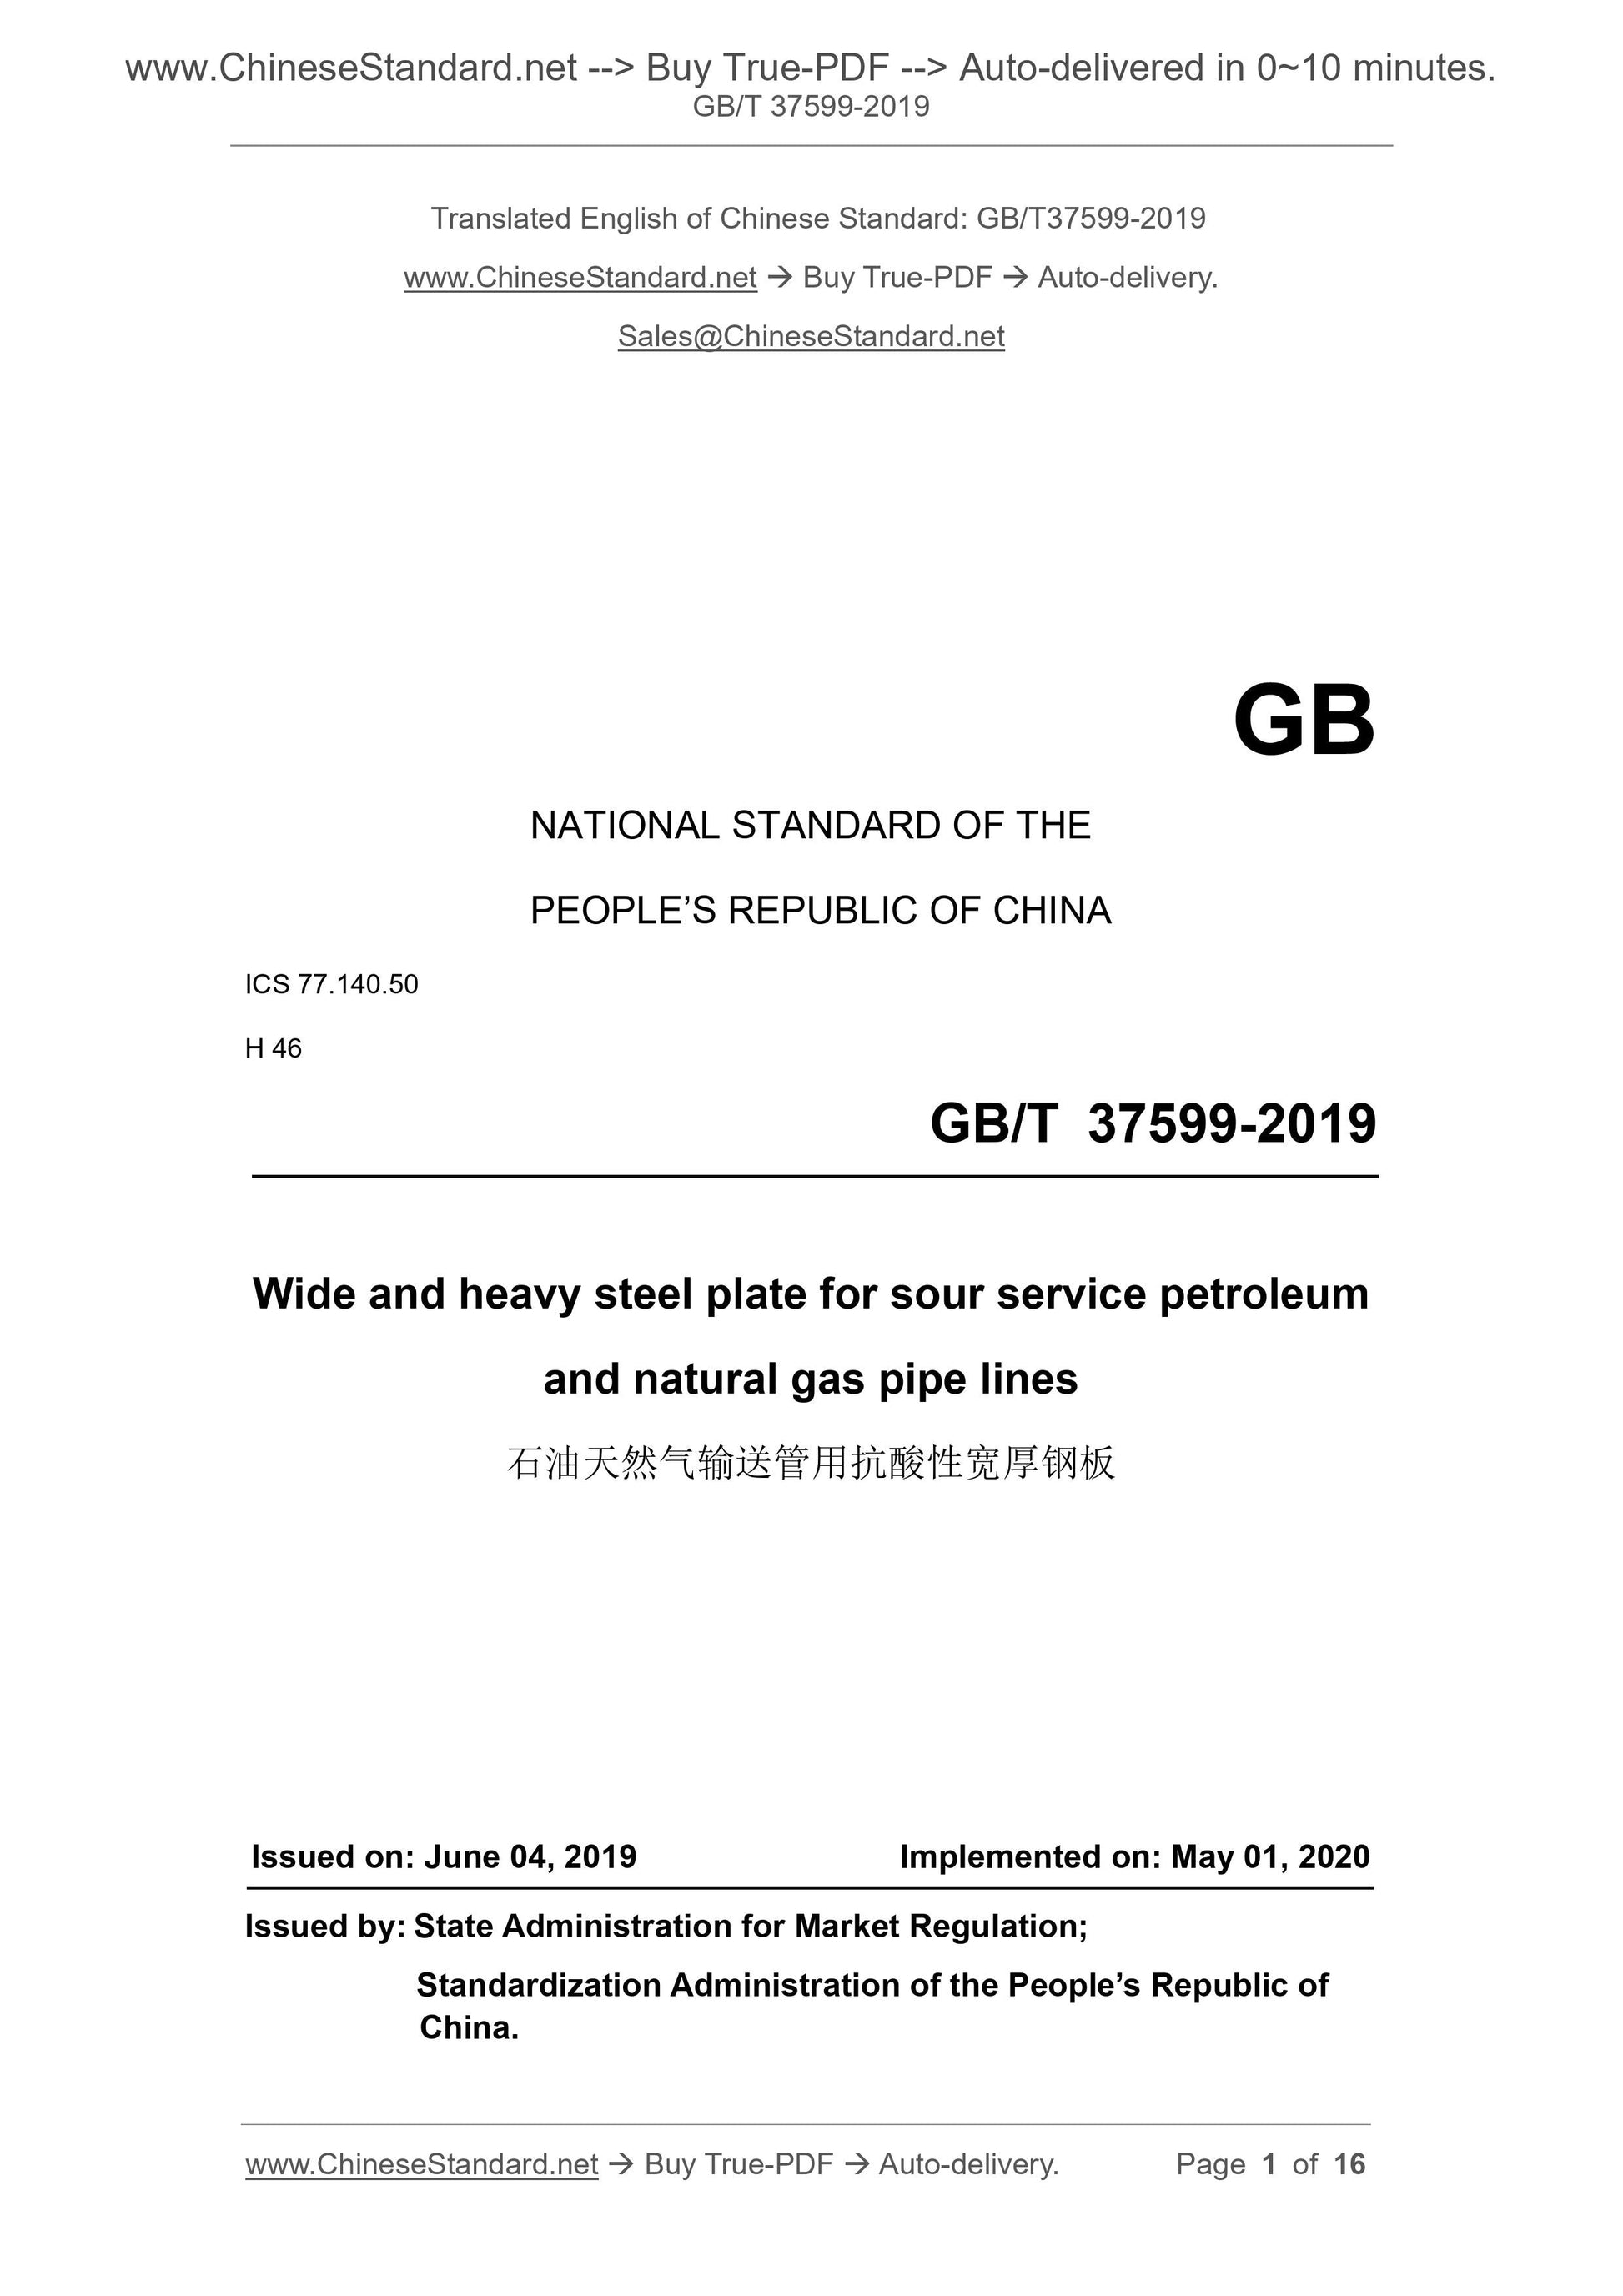 GB/T 37599-2019 Page 1